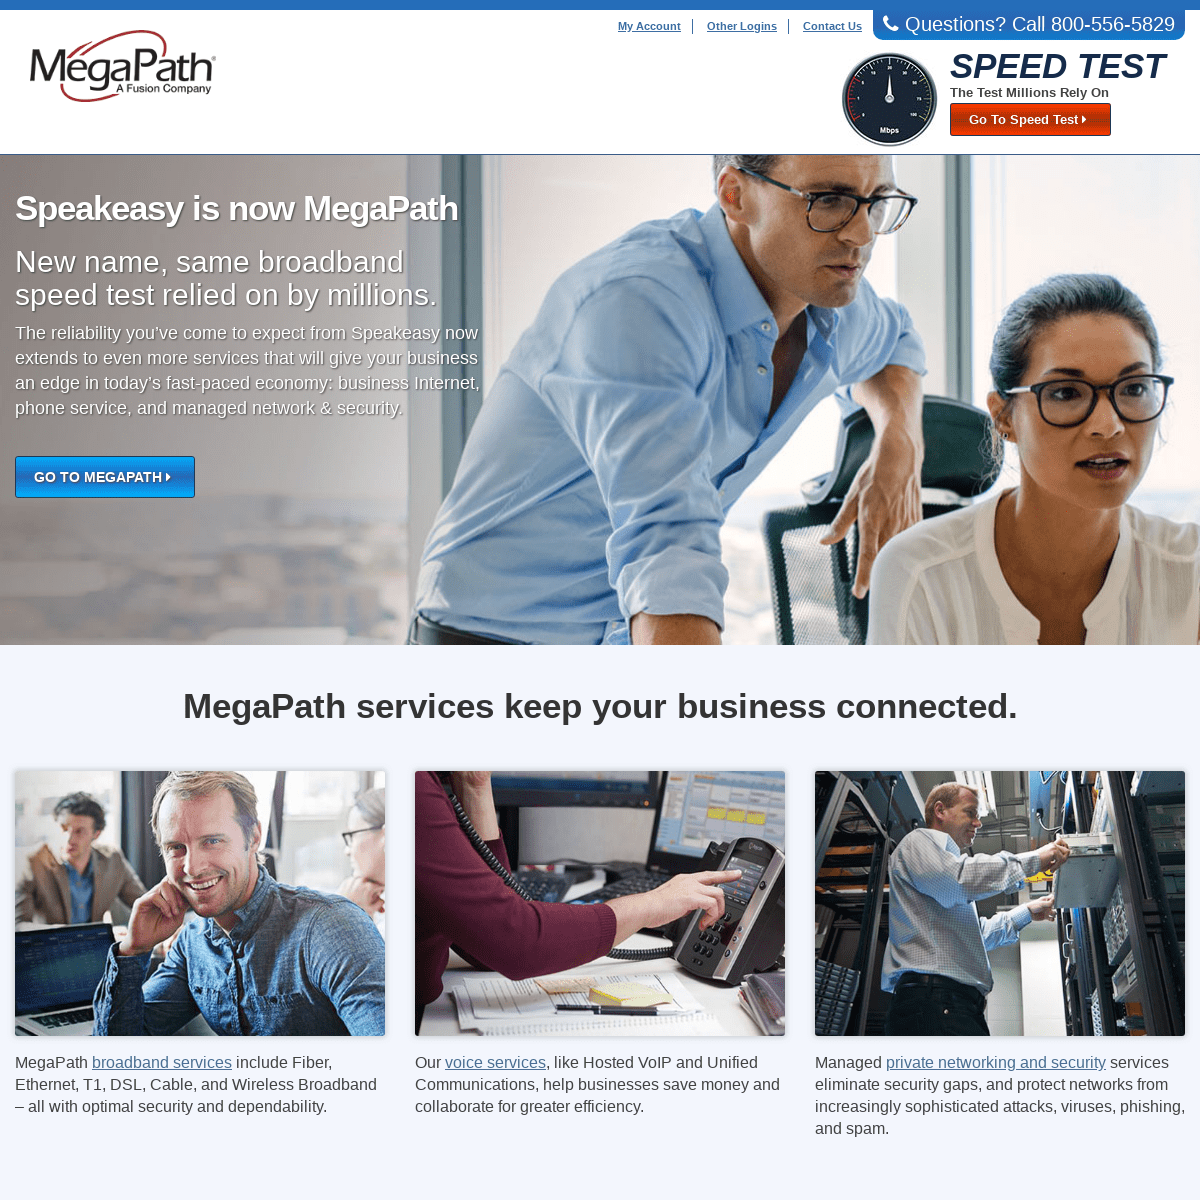 MegaPath - Formerly Speakeasy, MegaPath is a Leader in Business Telecommunications and IP Services